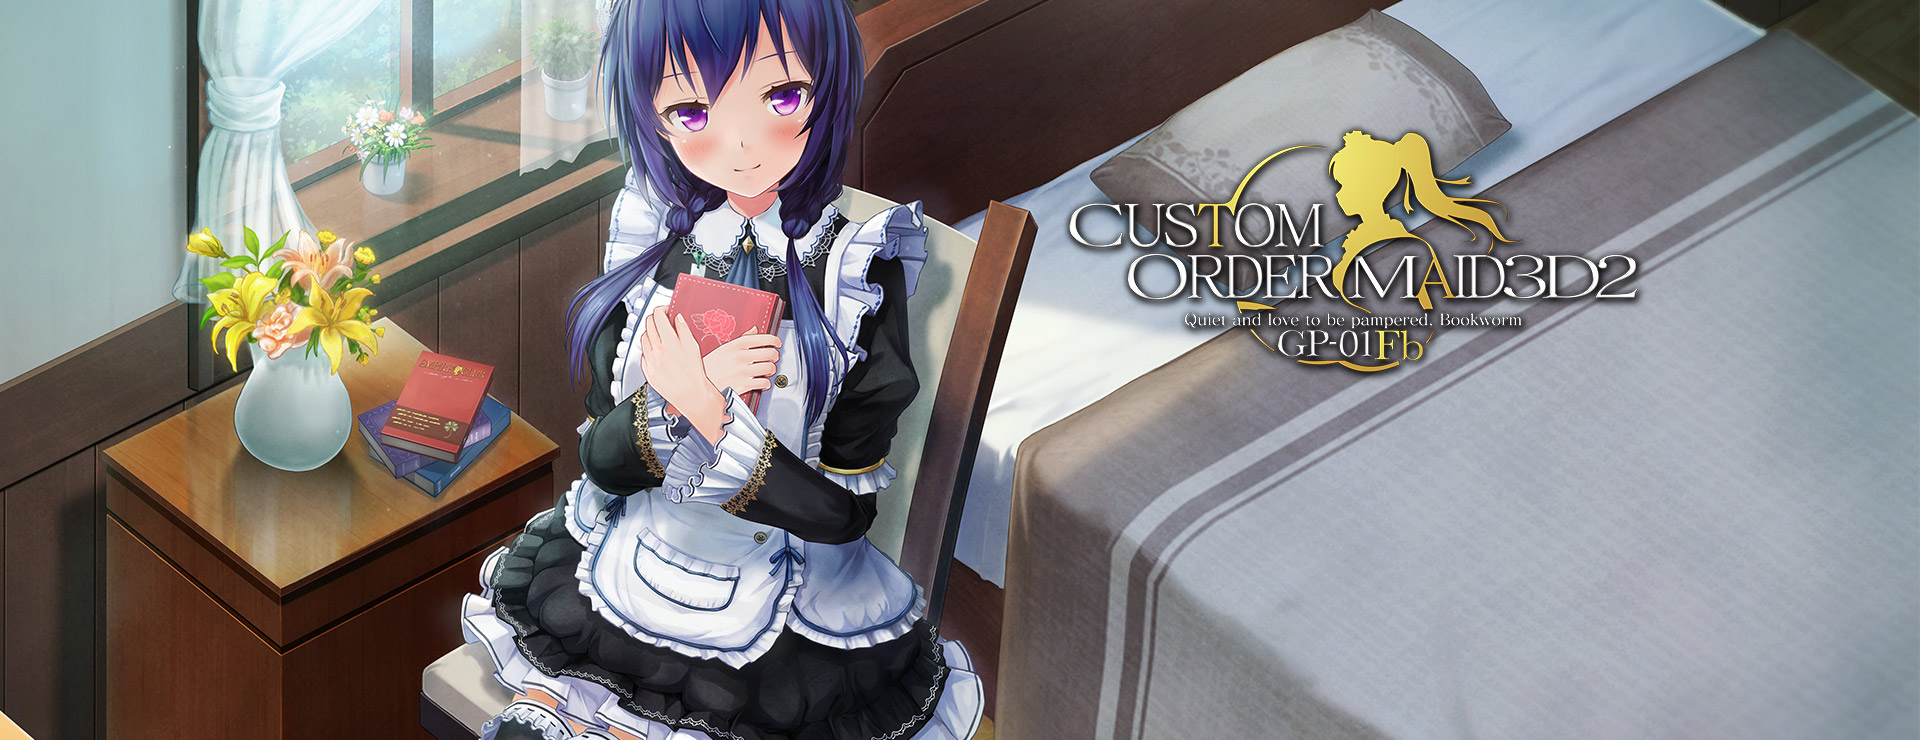 Custom Order Maid 3D2 - Quiet and love to be pampered Bookworm GP-01Fb DLC - Simulation Jeu